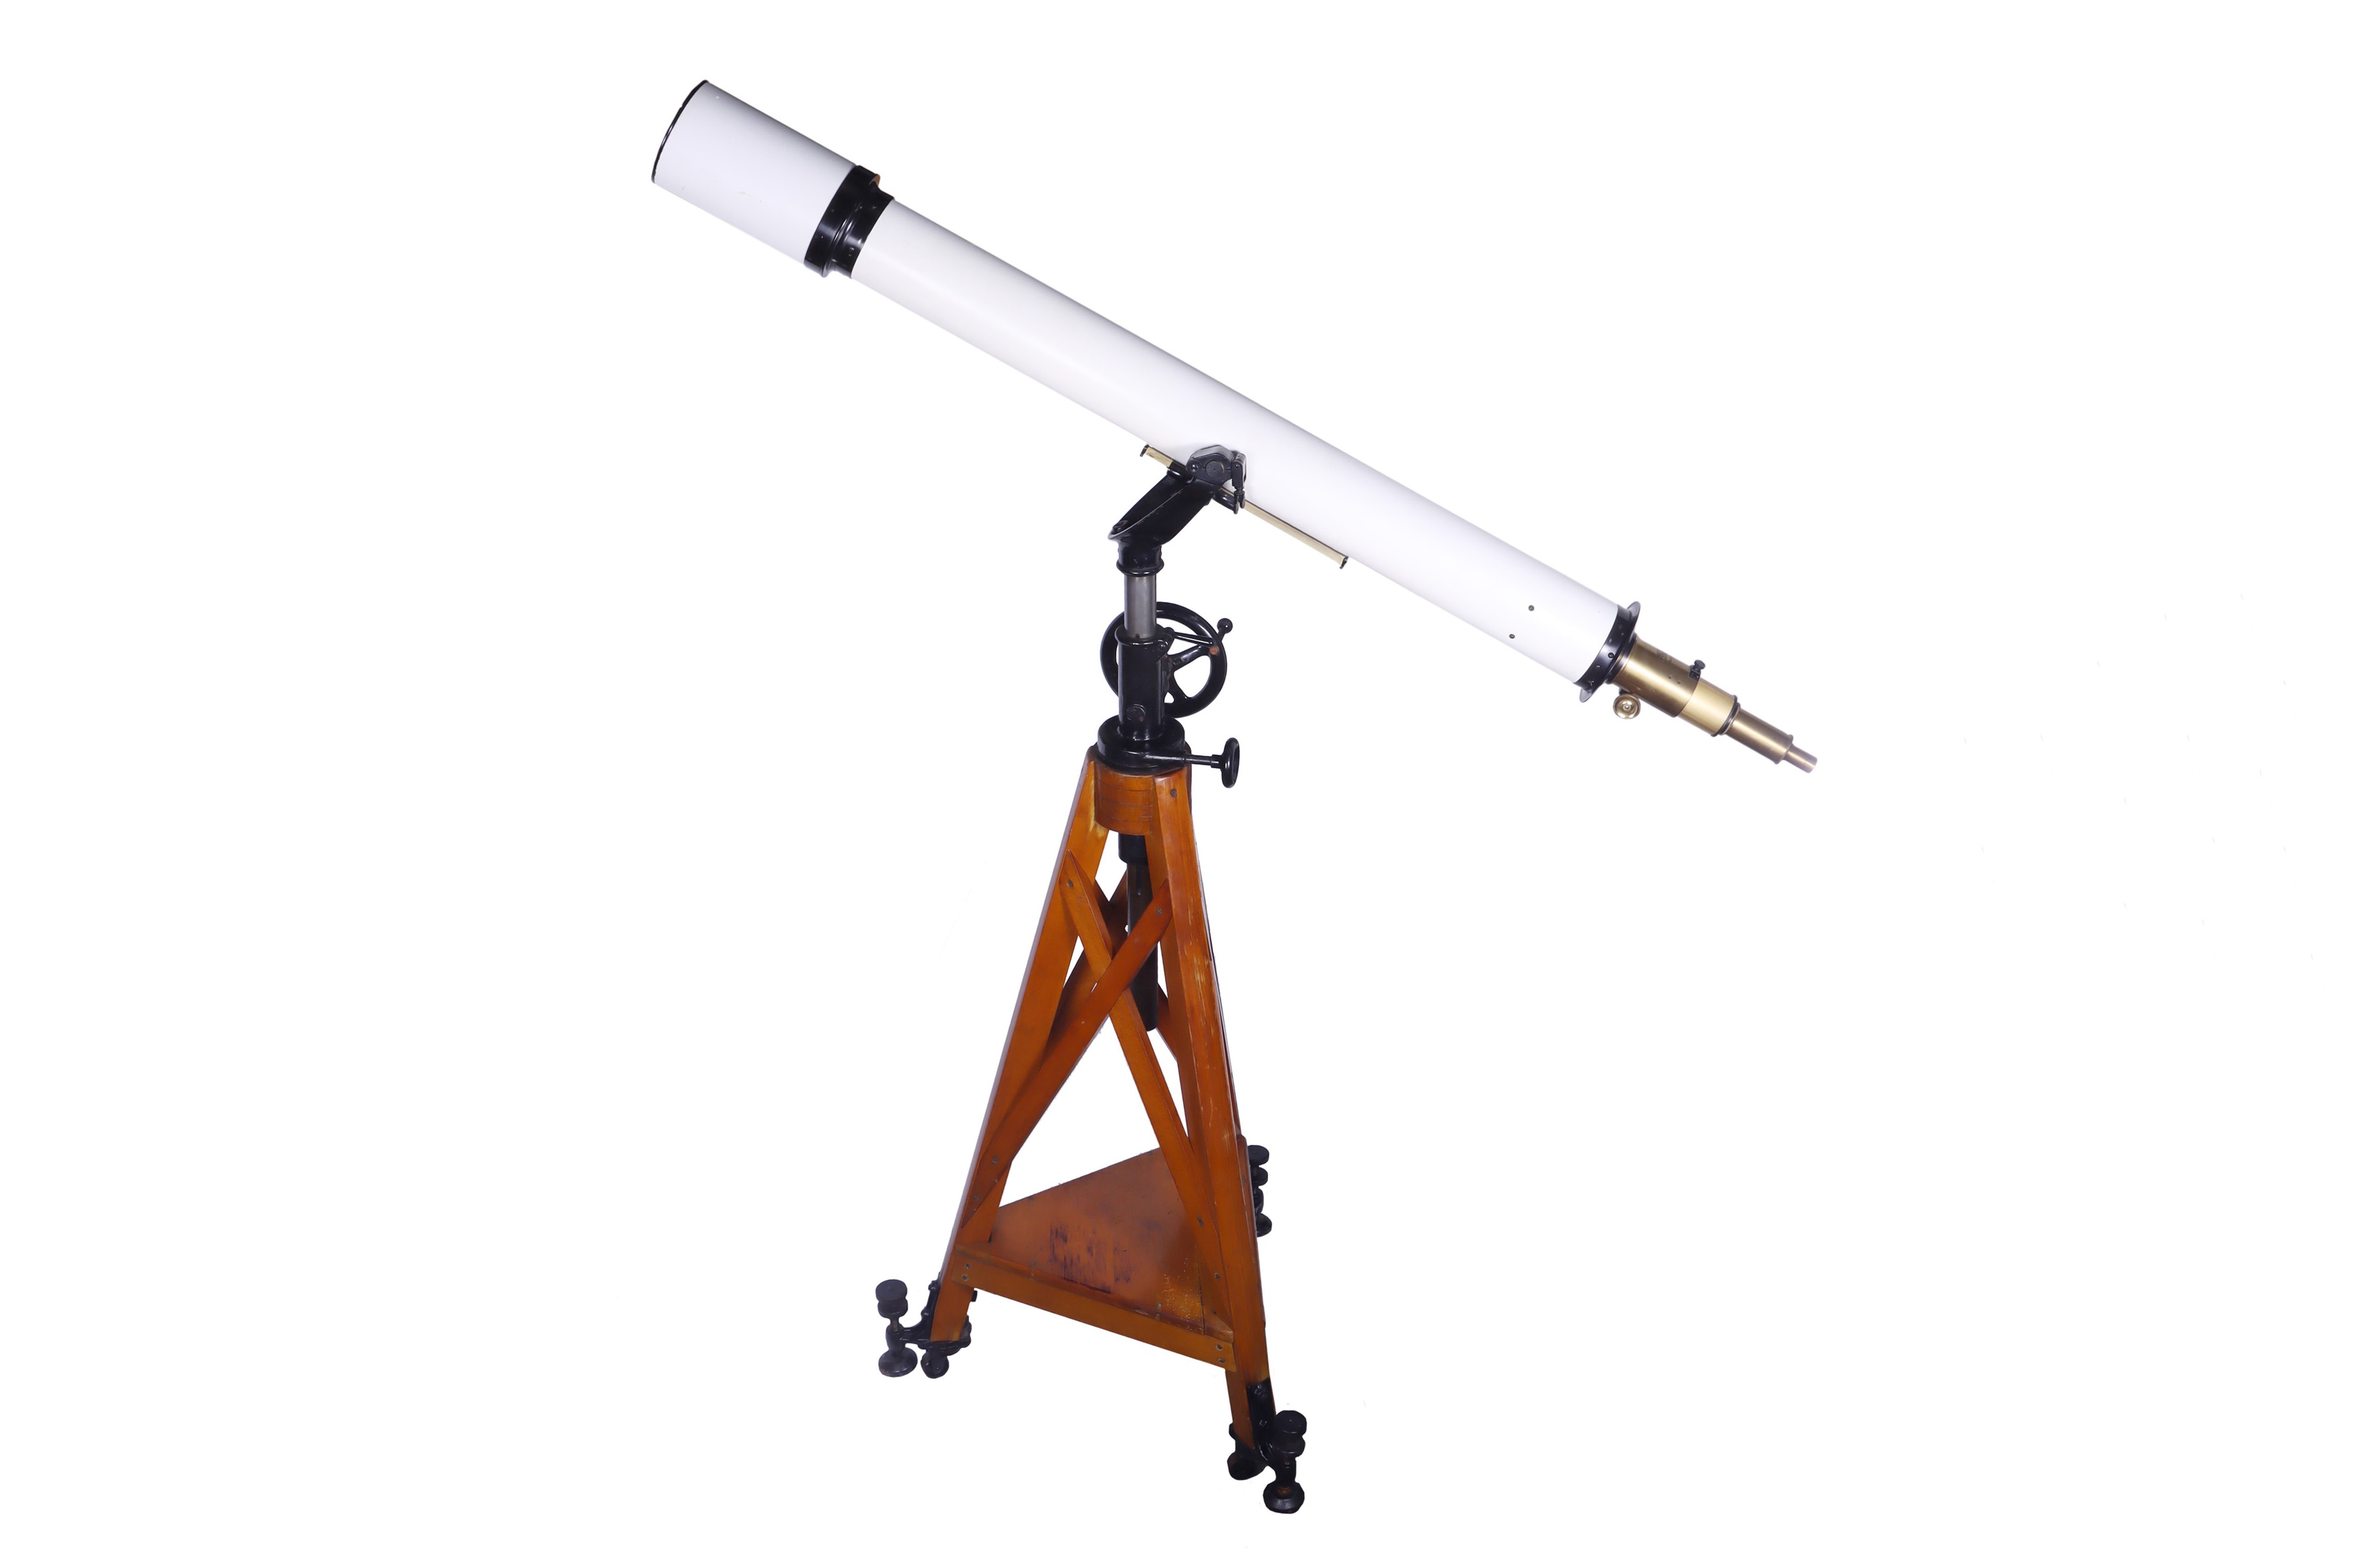 Large & Impressive 4in Astronomical Telescope By Carl Zeiss Jena,